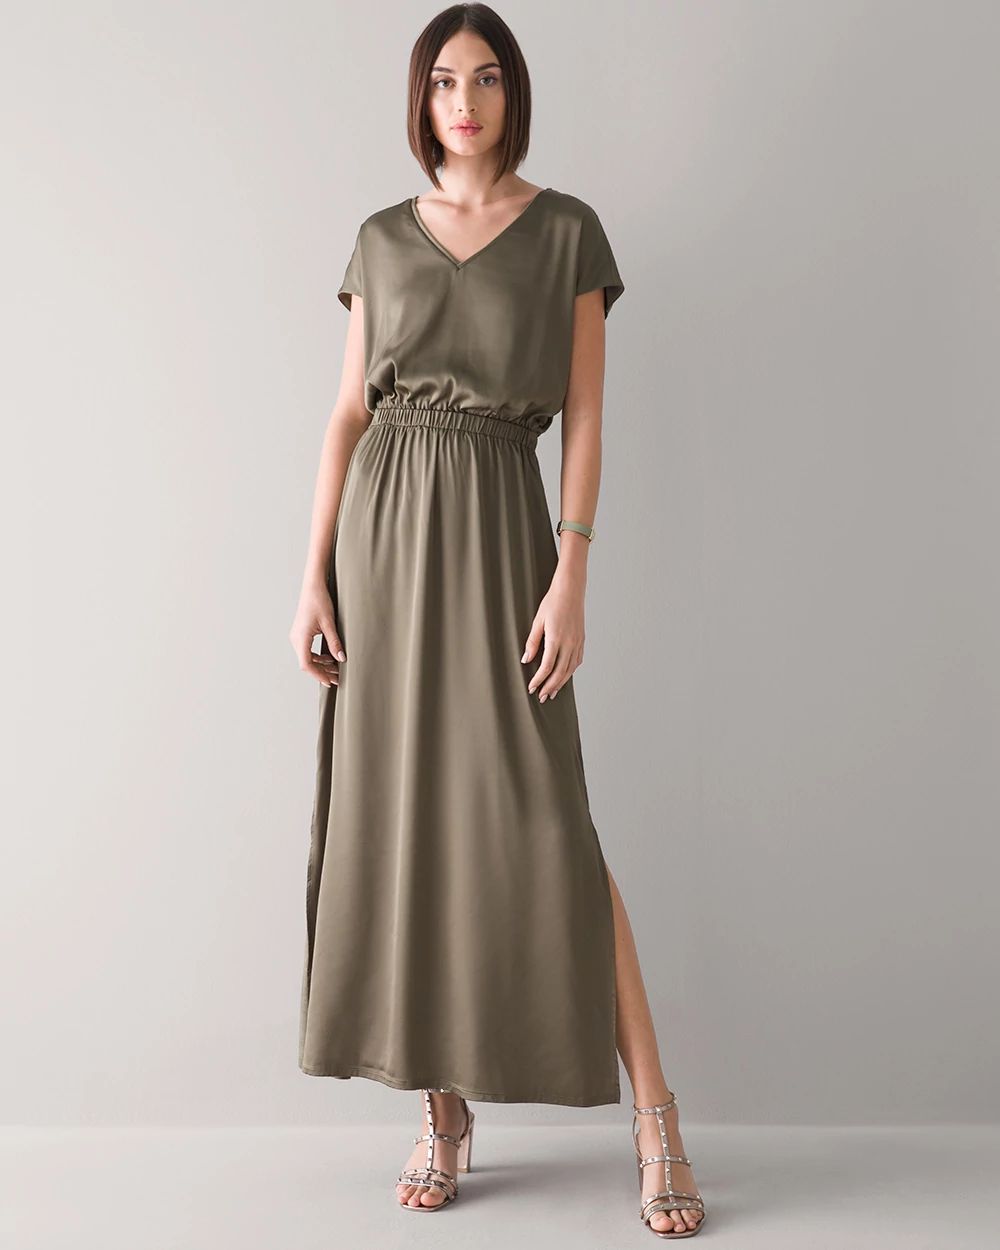 Jetsetter Maxi Dress click to view larger image.